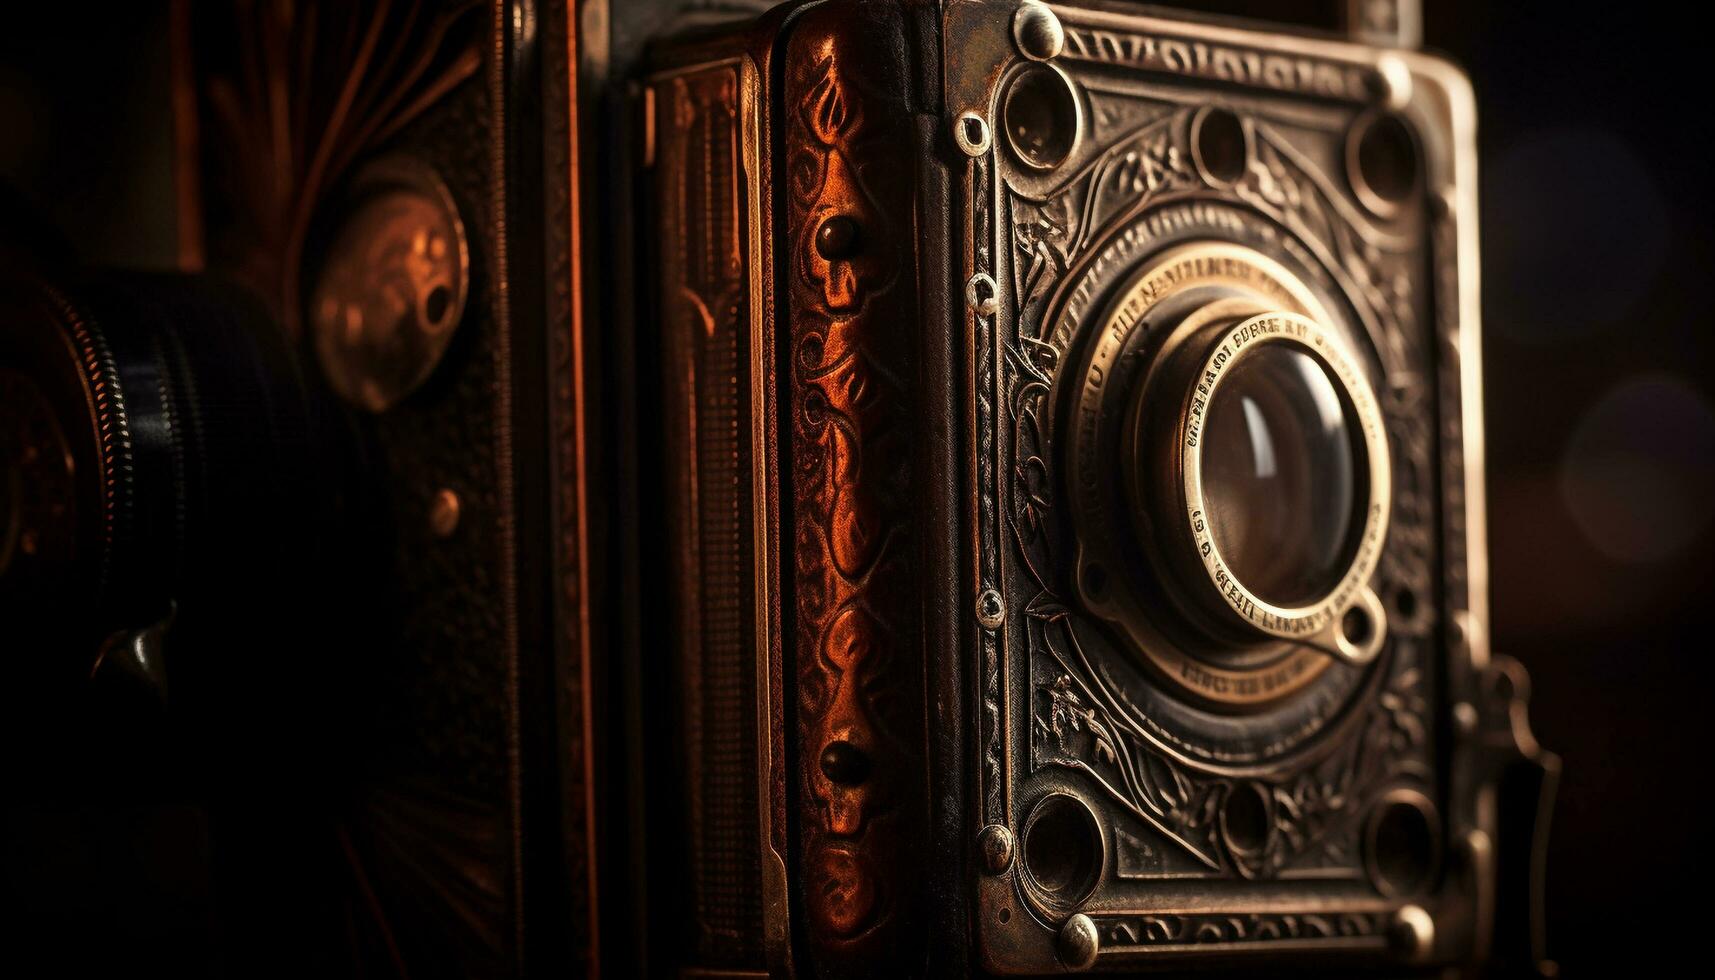 Antique camera with elegant leather and wood generated by AI photo